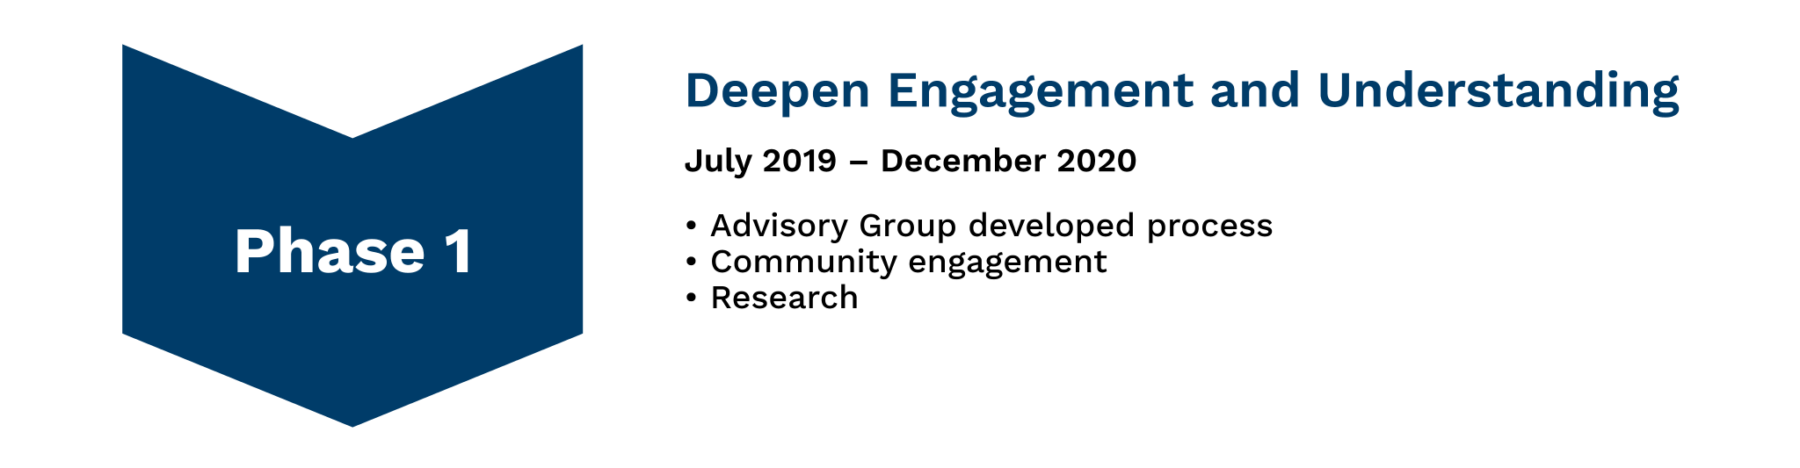 Image depicts a chevron labeled Phase 1
Heading: Deepen Engagement and Understanding 
Subheading: July 2019 – December 2020
Body: Advisory group developed process
Community engagement 
research